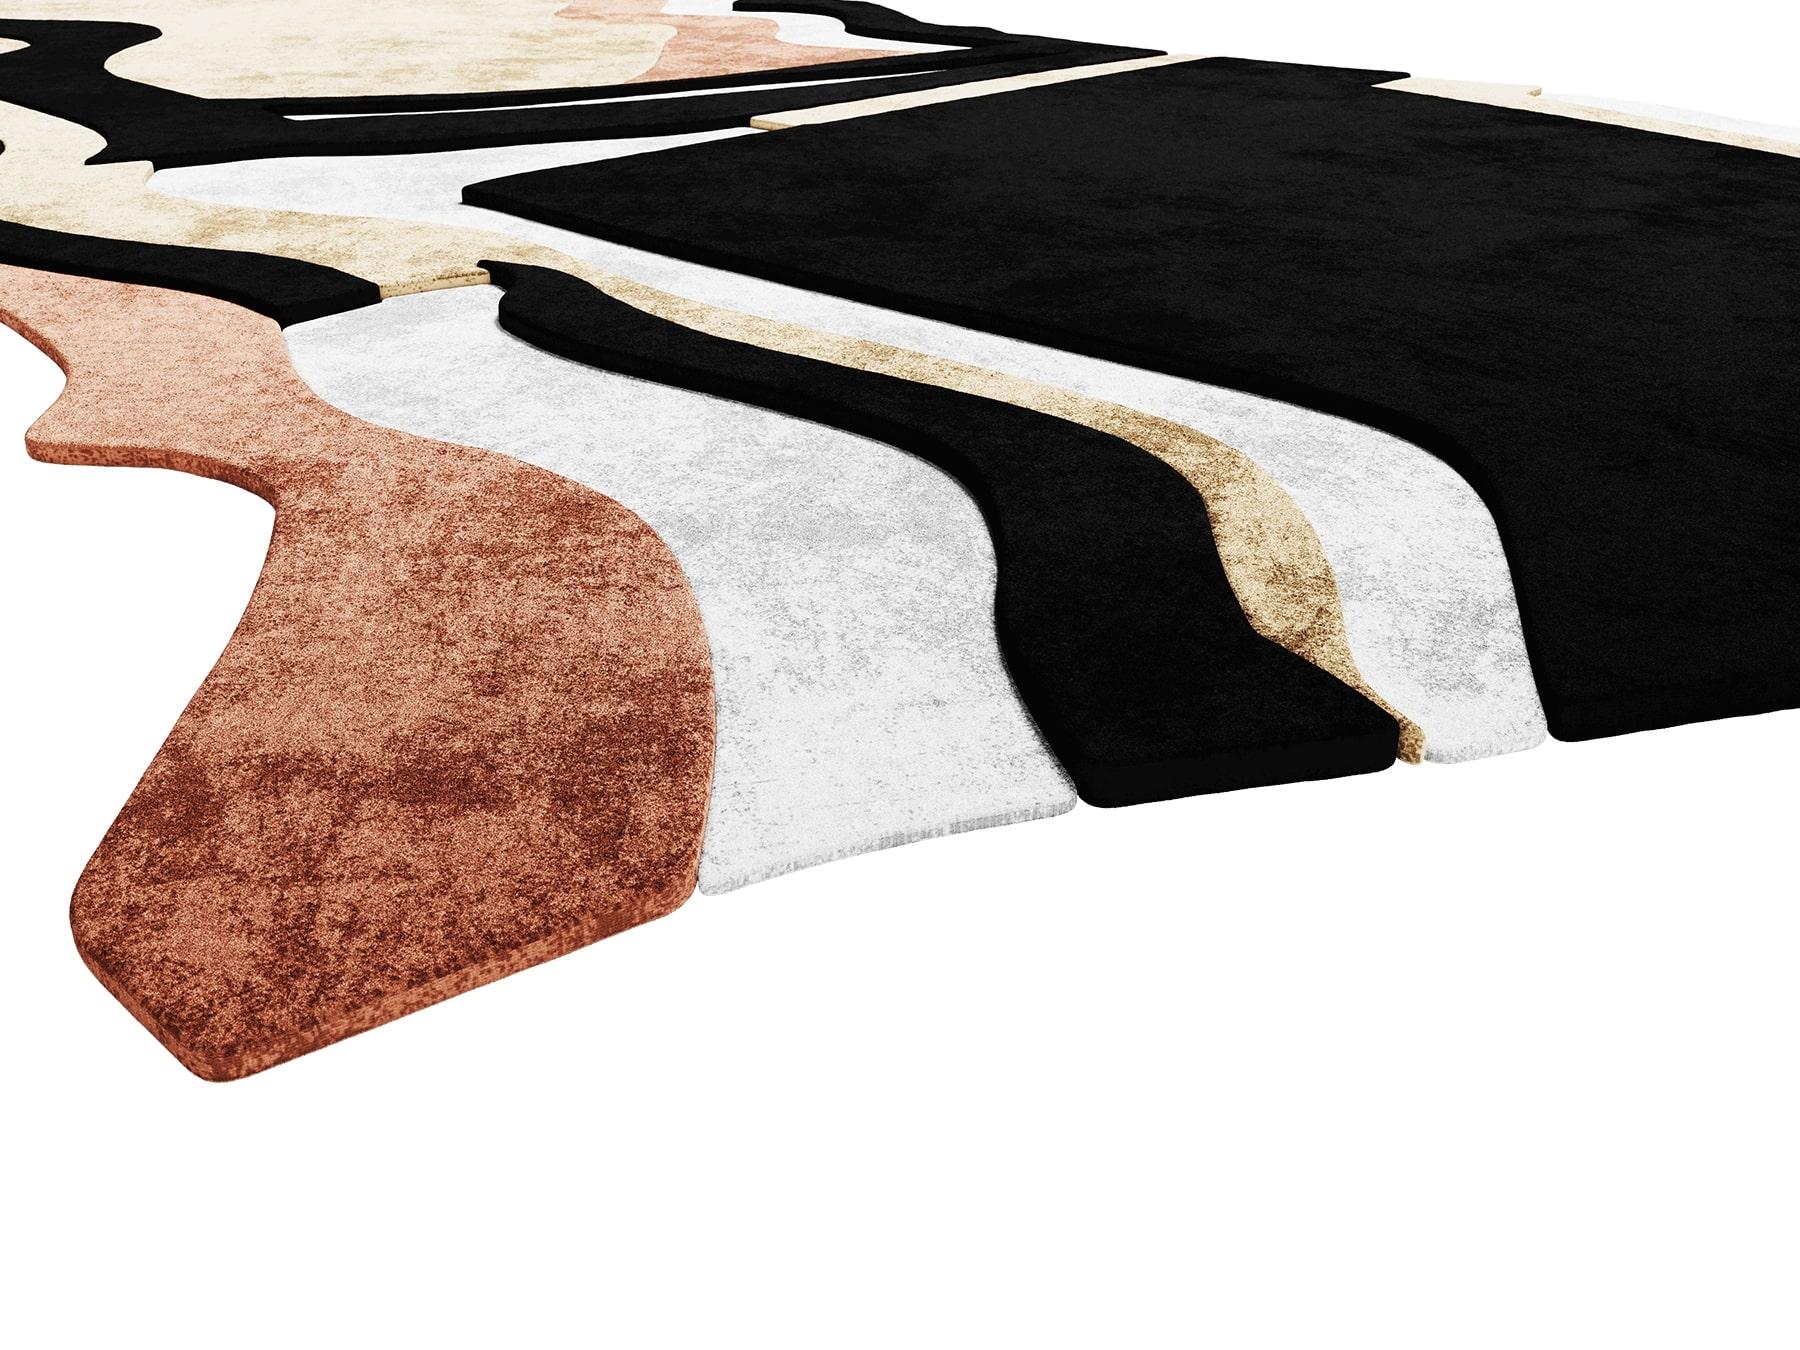 Tapis Shaped #038 also known as Combo Rug is a powerful piece by HOMMÉS Studio x TAPIS Studio. With an abstract design, this modern rug can be the protagonist of your contemporary interior design project.

Made by the wisest hands, this rug features